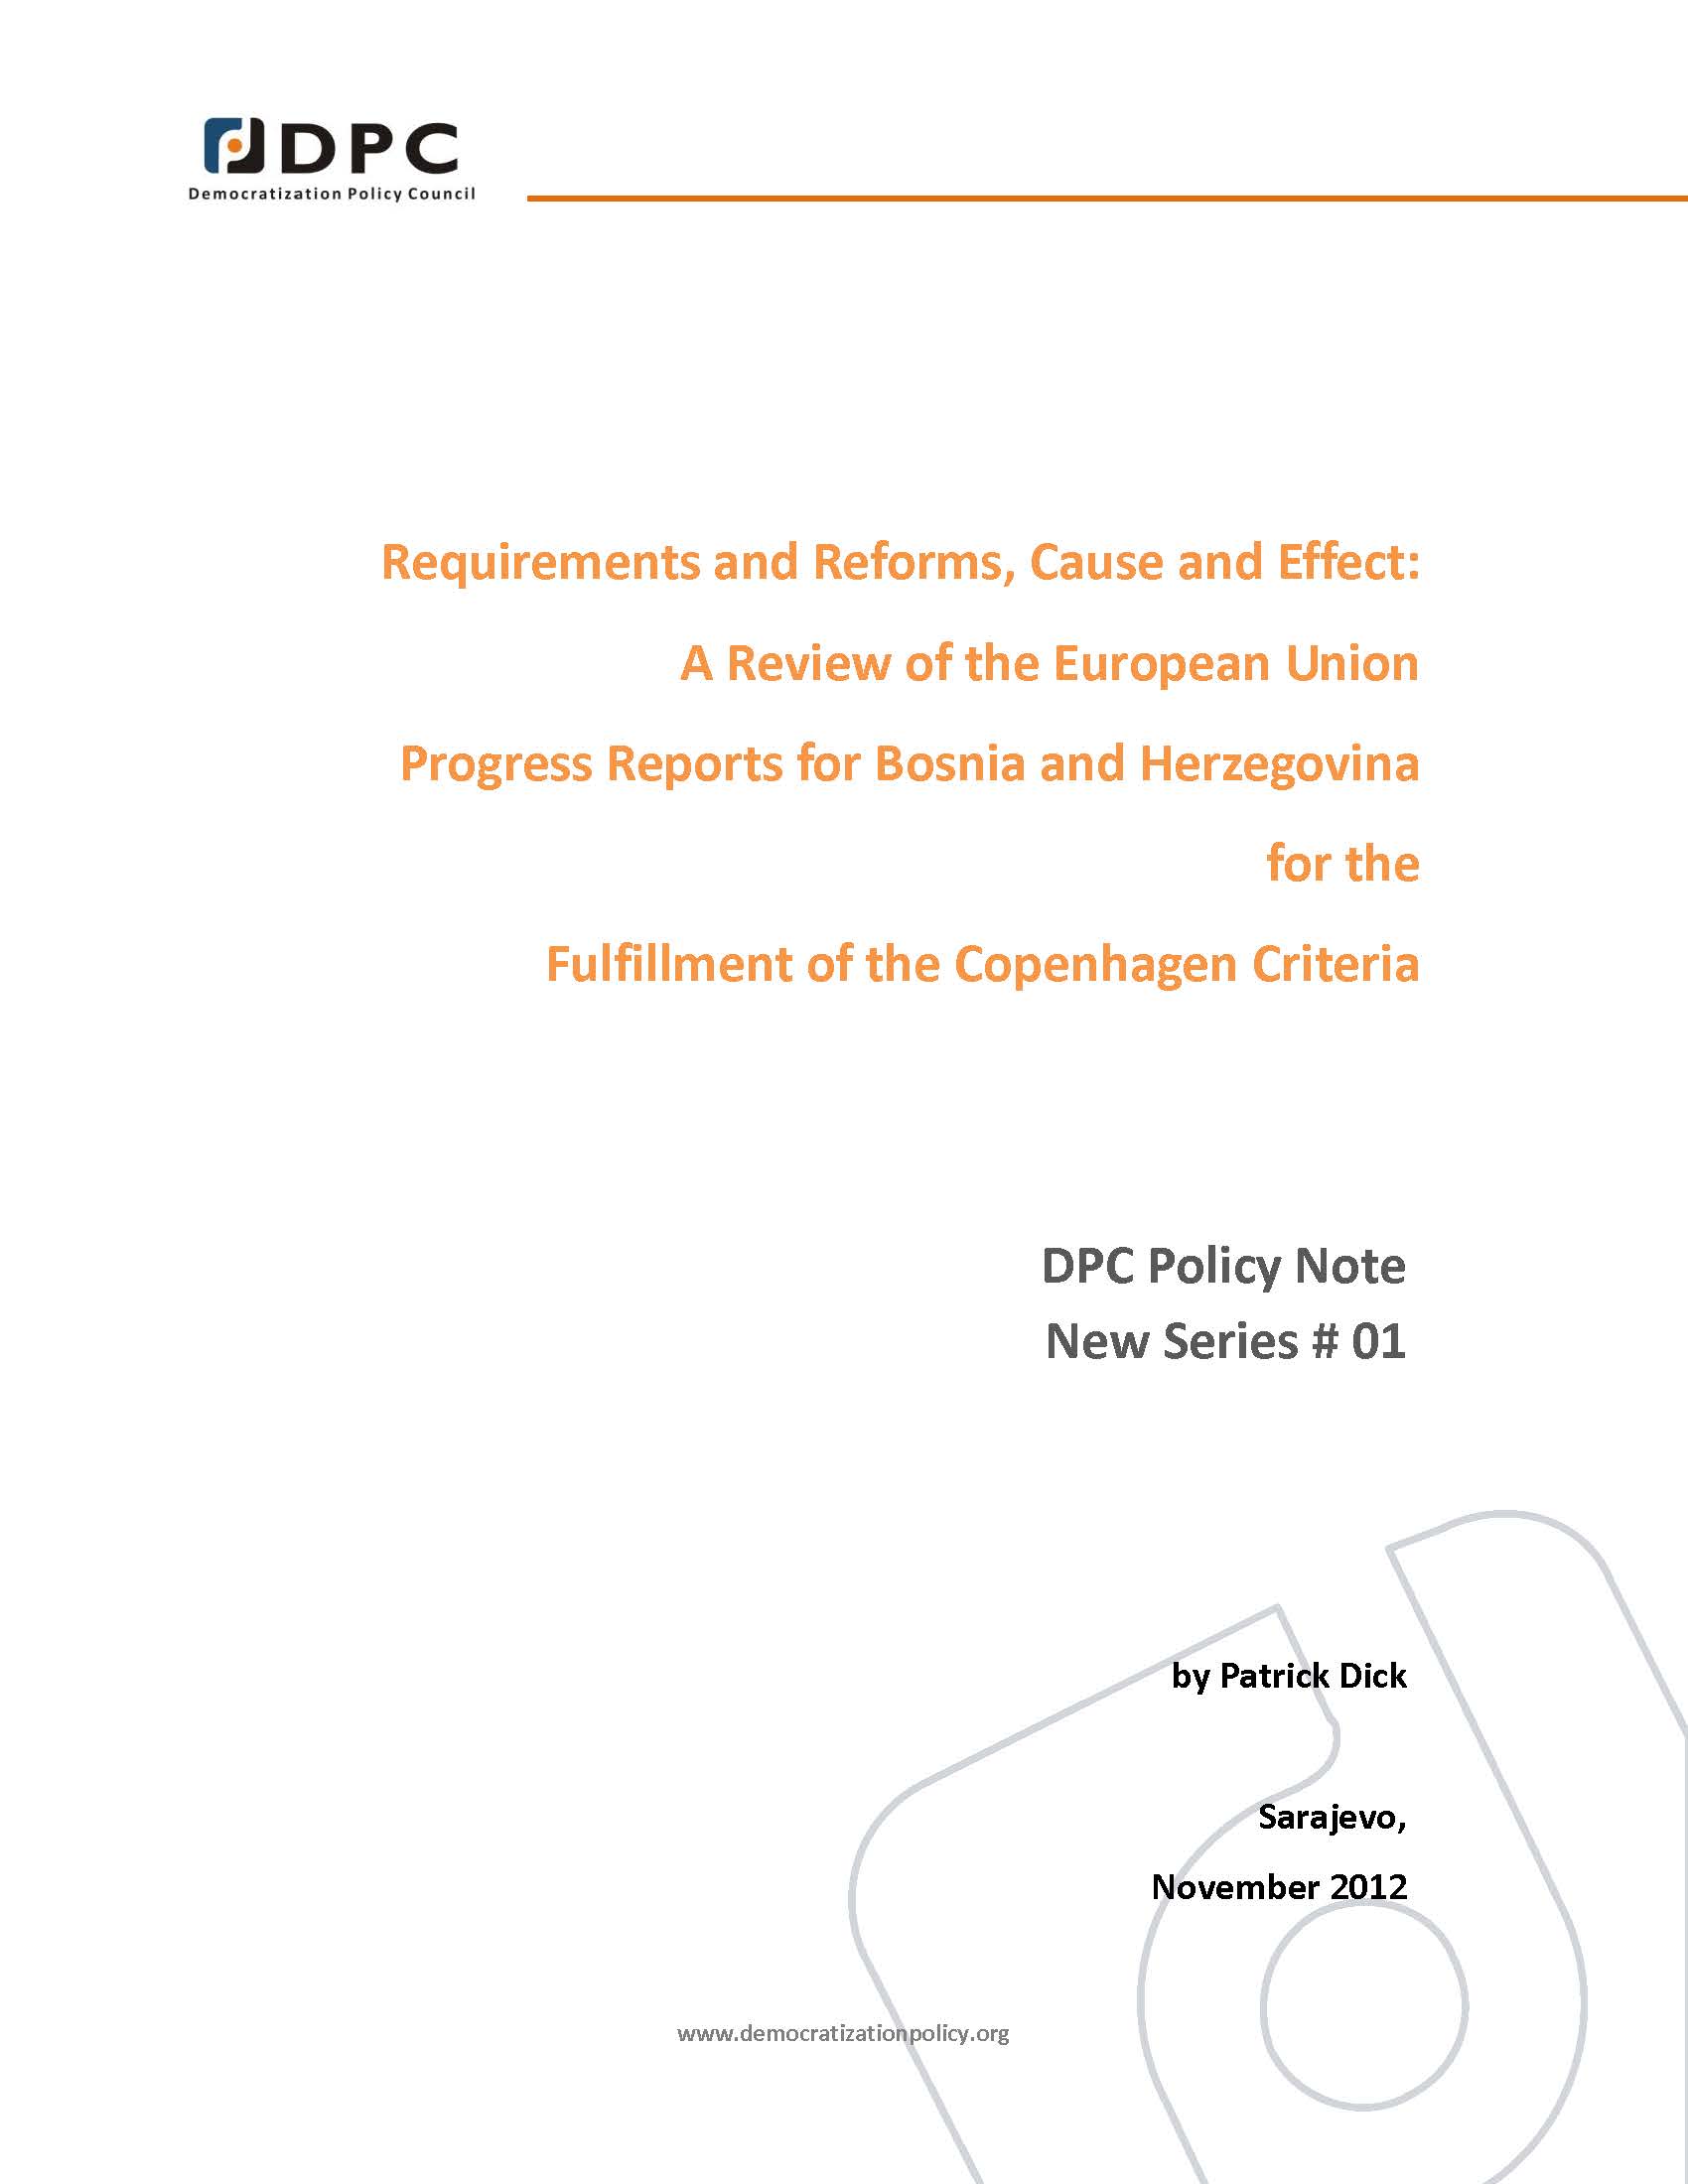 DPC POLICY NOTE 01: Requirements and Reforms, Cause and Effect: A Review of the European Union Progress Reports for Bosnia and Herzegovina for the Fulfillment of the Copenhagen Criteria.